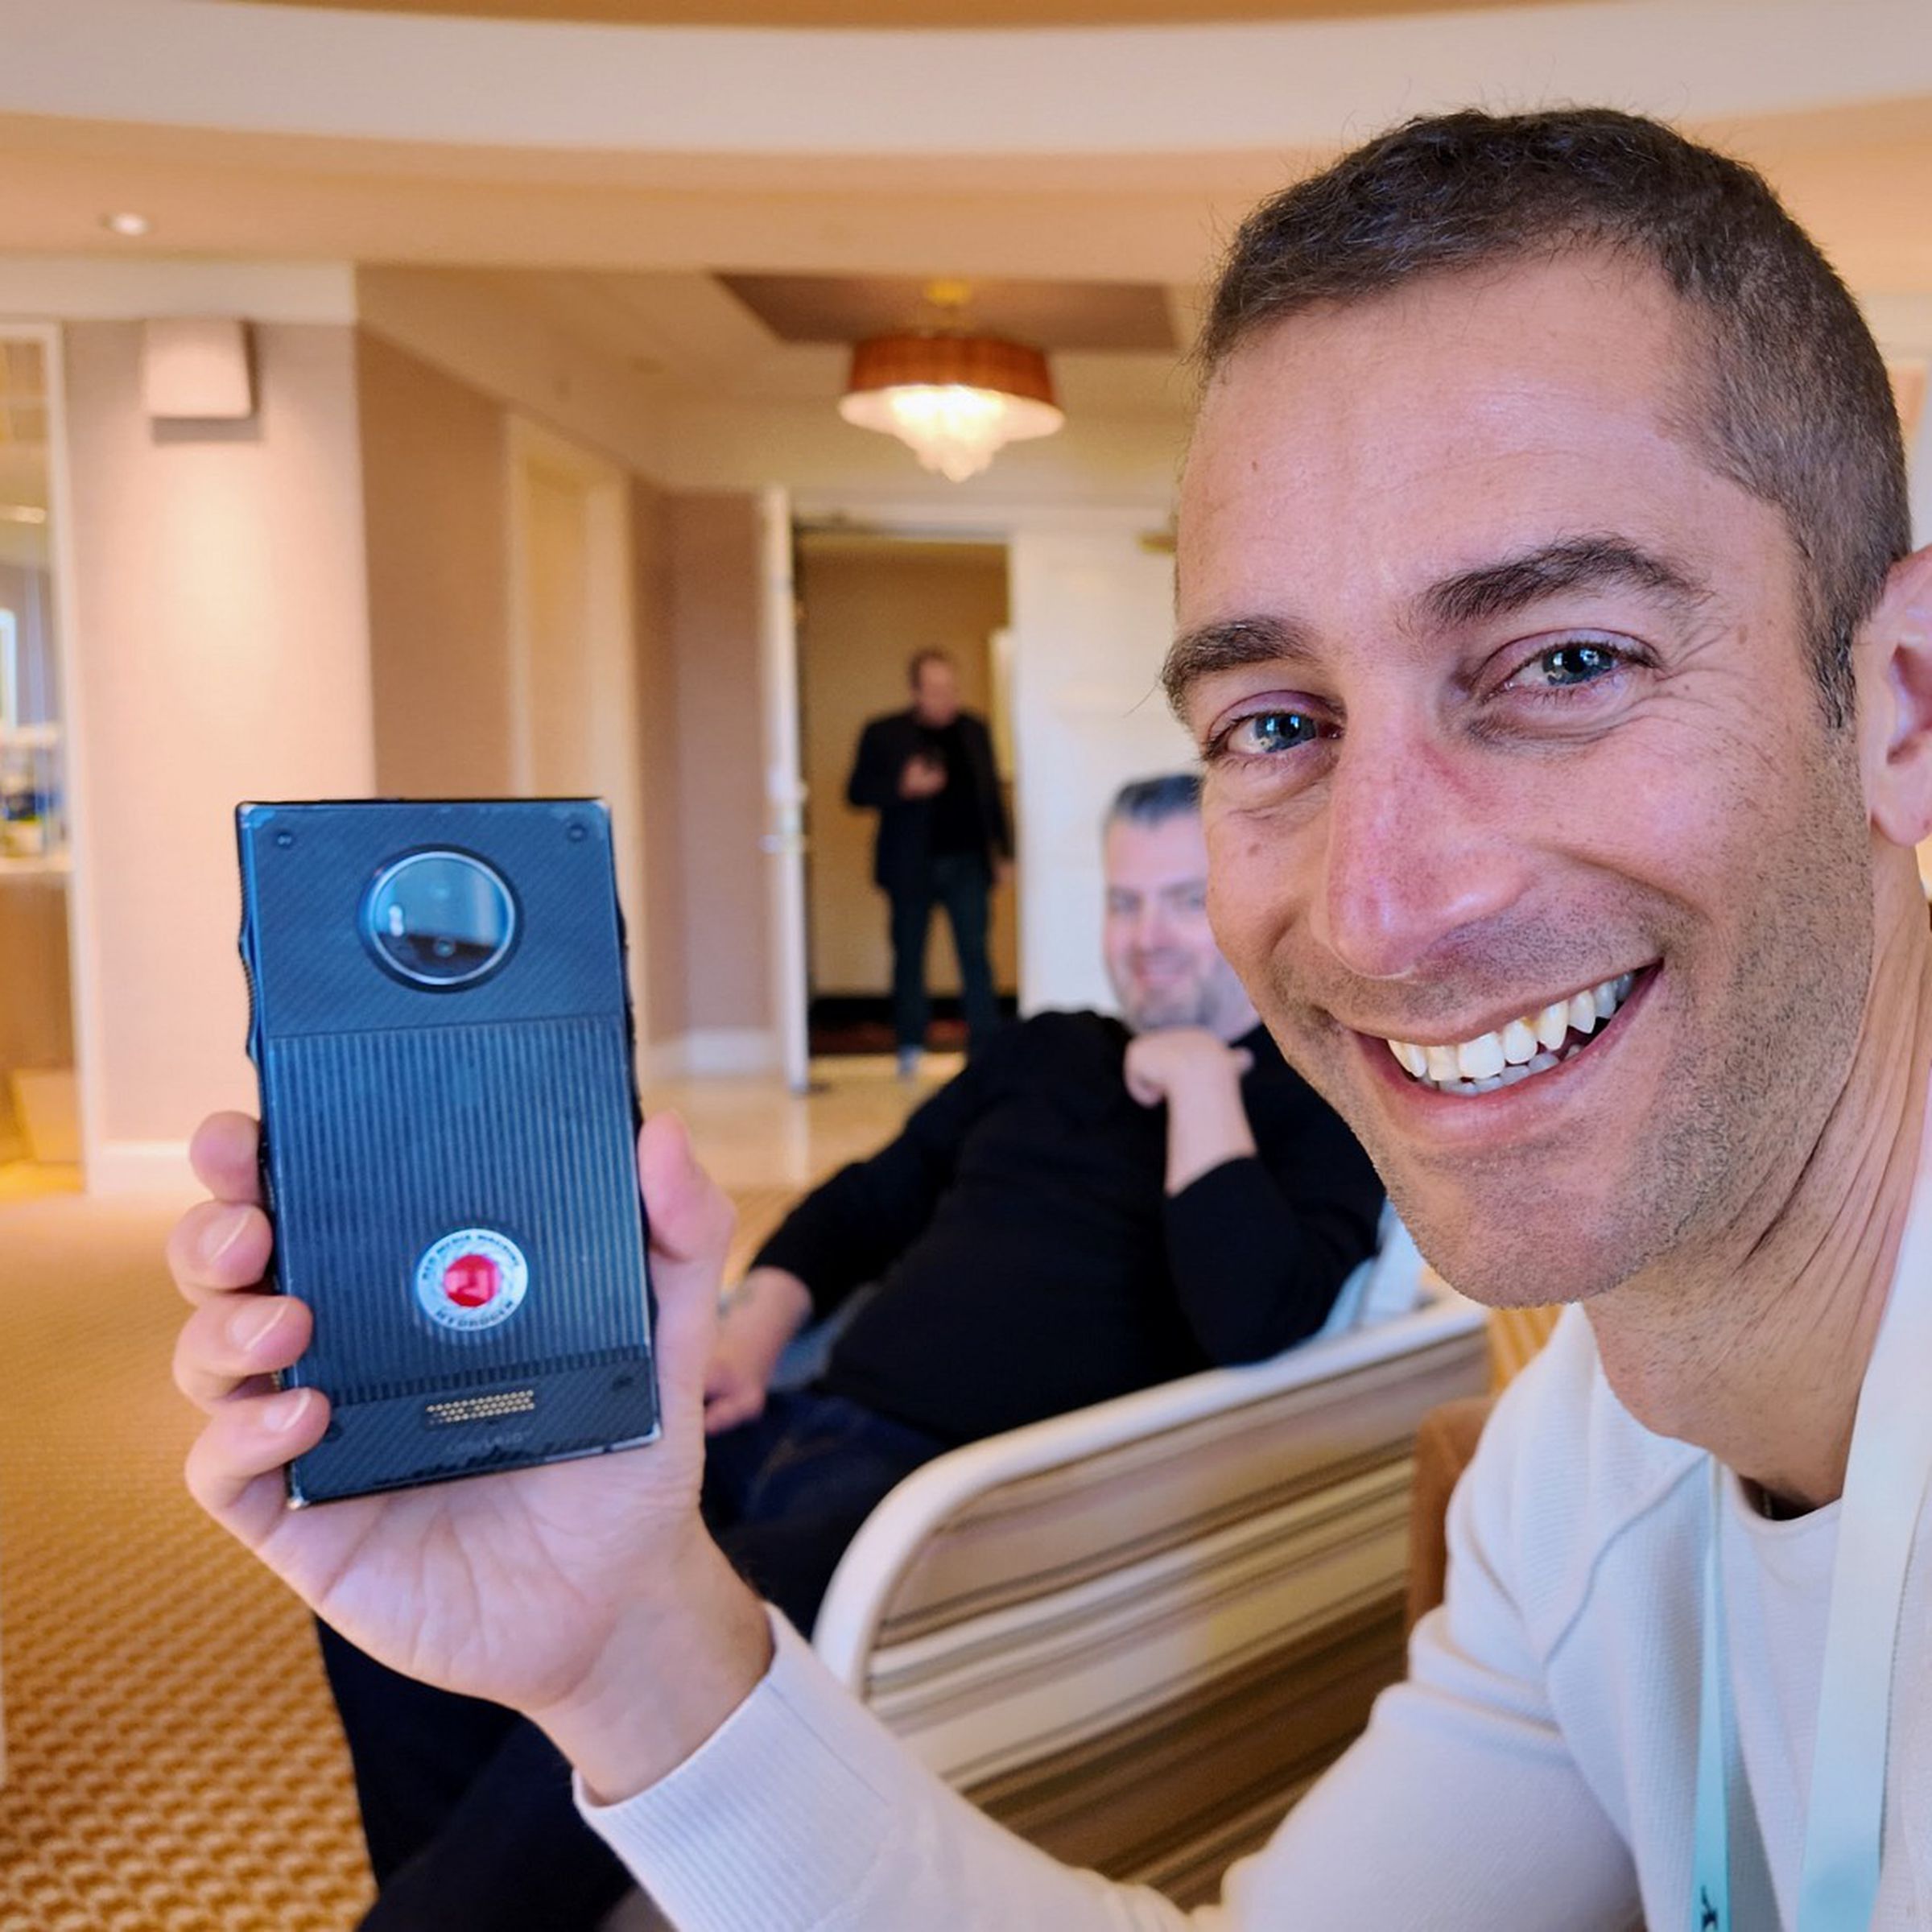 Leia co-founder and CEO David Fattal, with his Red Hydrogen smartphone.